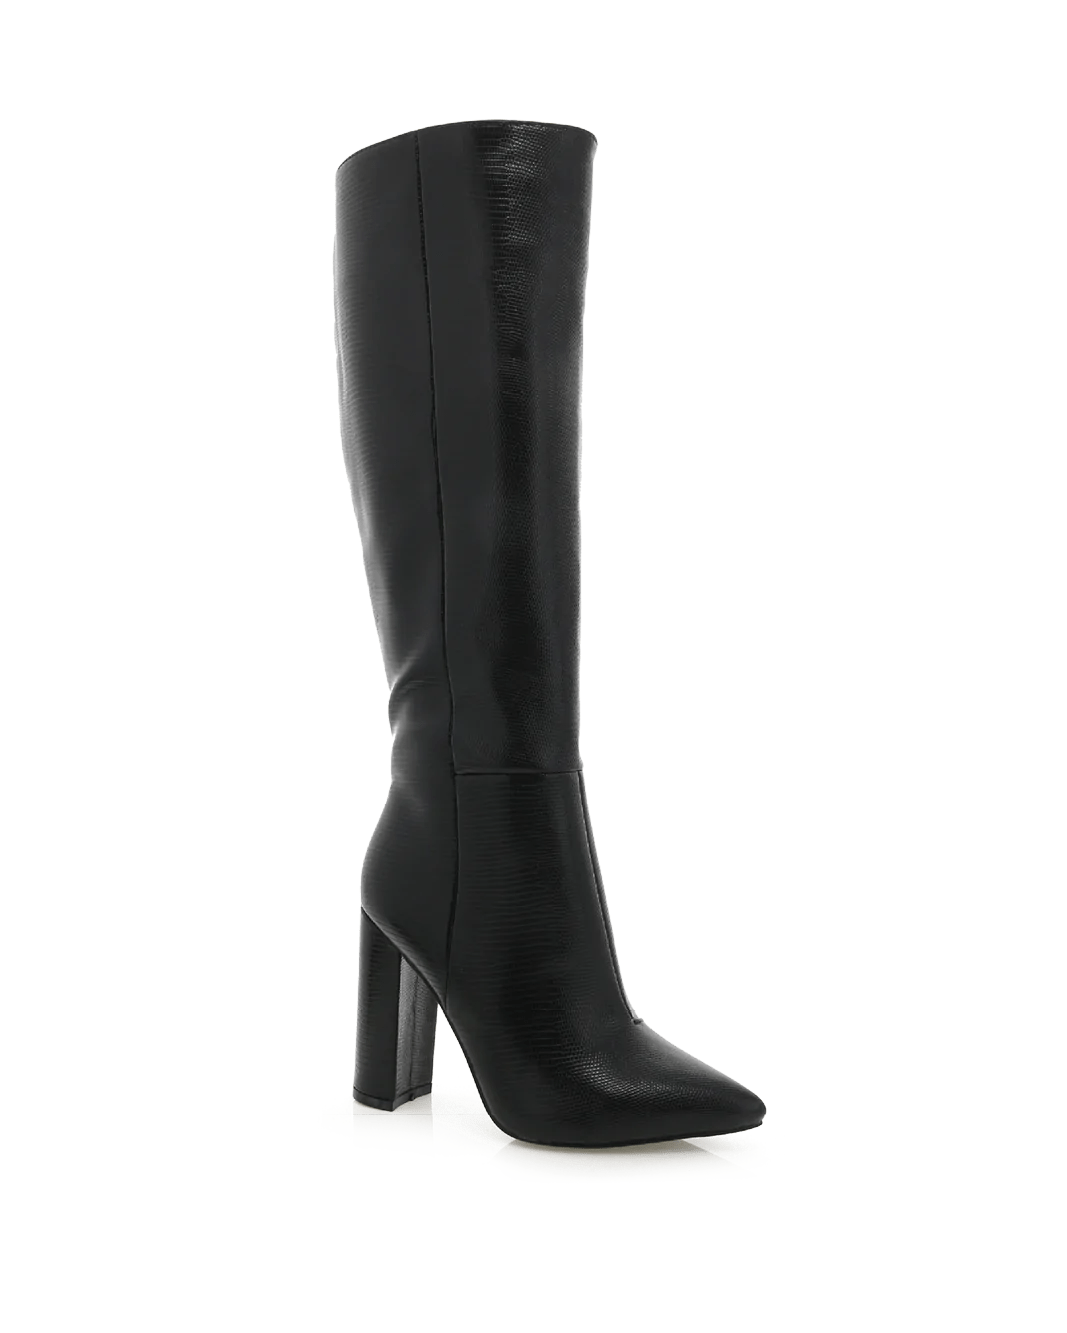 Milla Snake Knee High Boot Black, Shoes by Billini Shoes | LIT Boutique